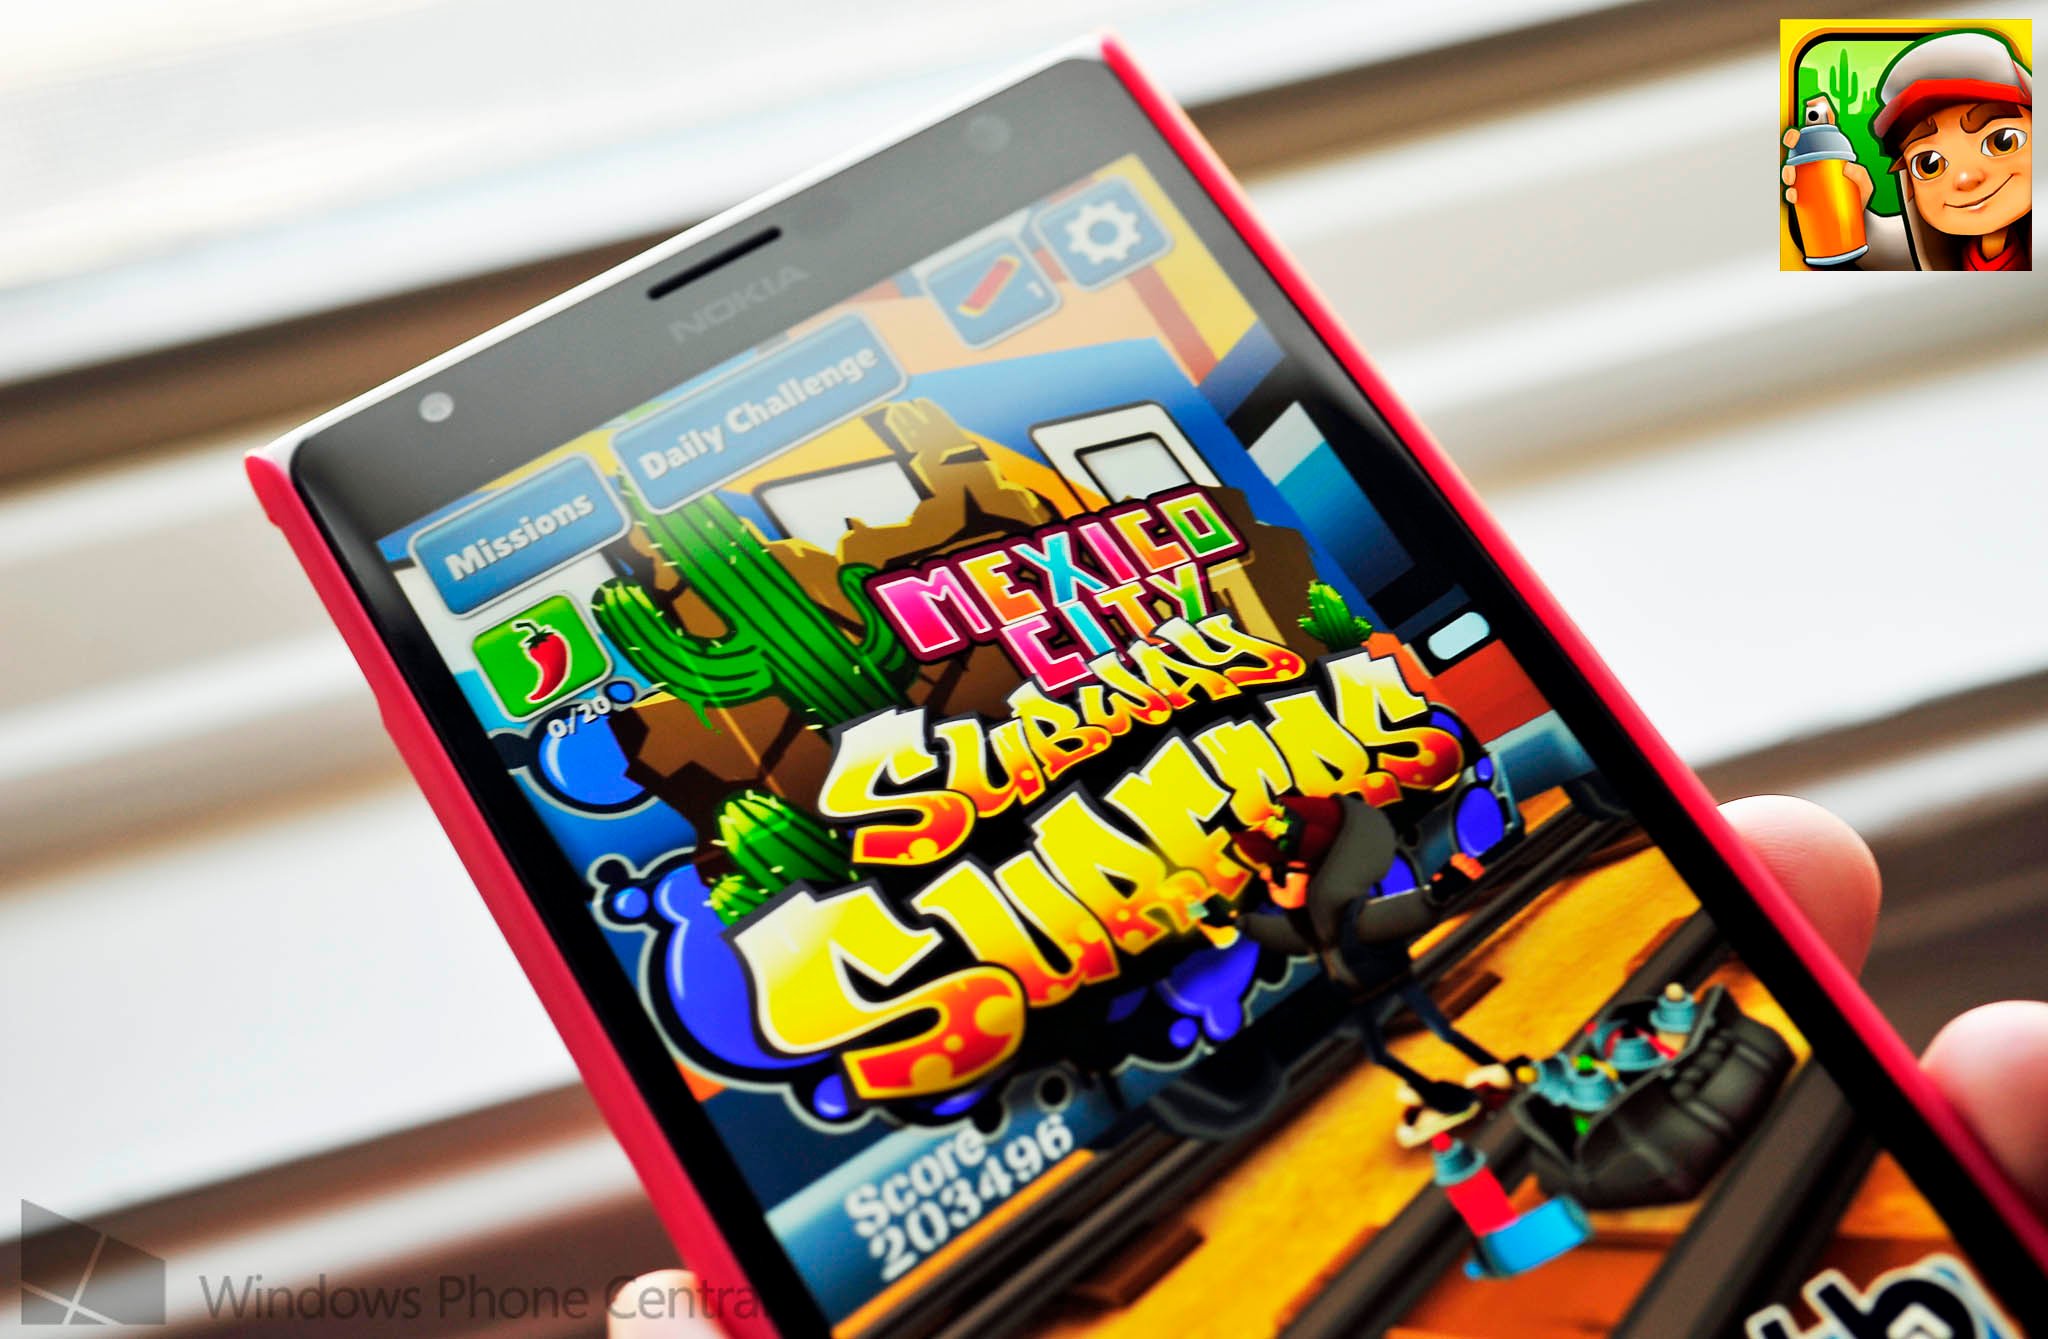 Subway Surfers for Windows Phone, Android & iOS Adds World Tour to